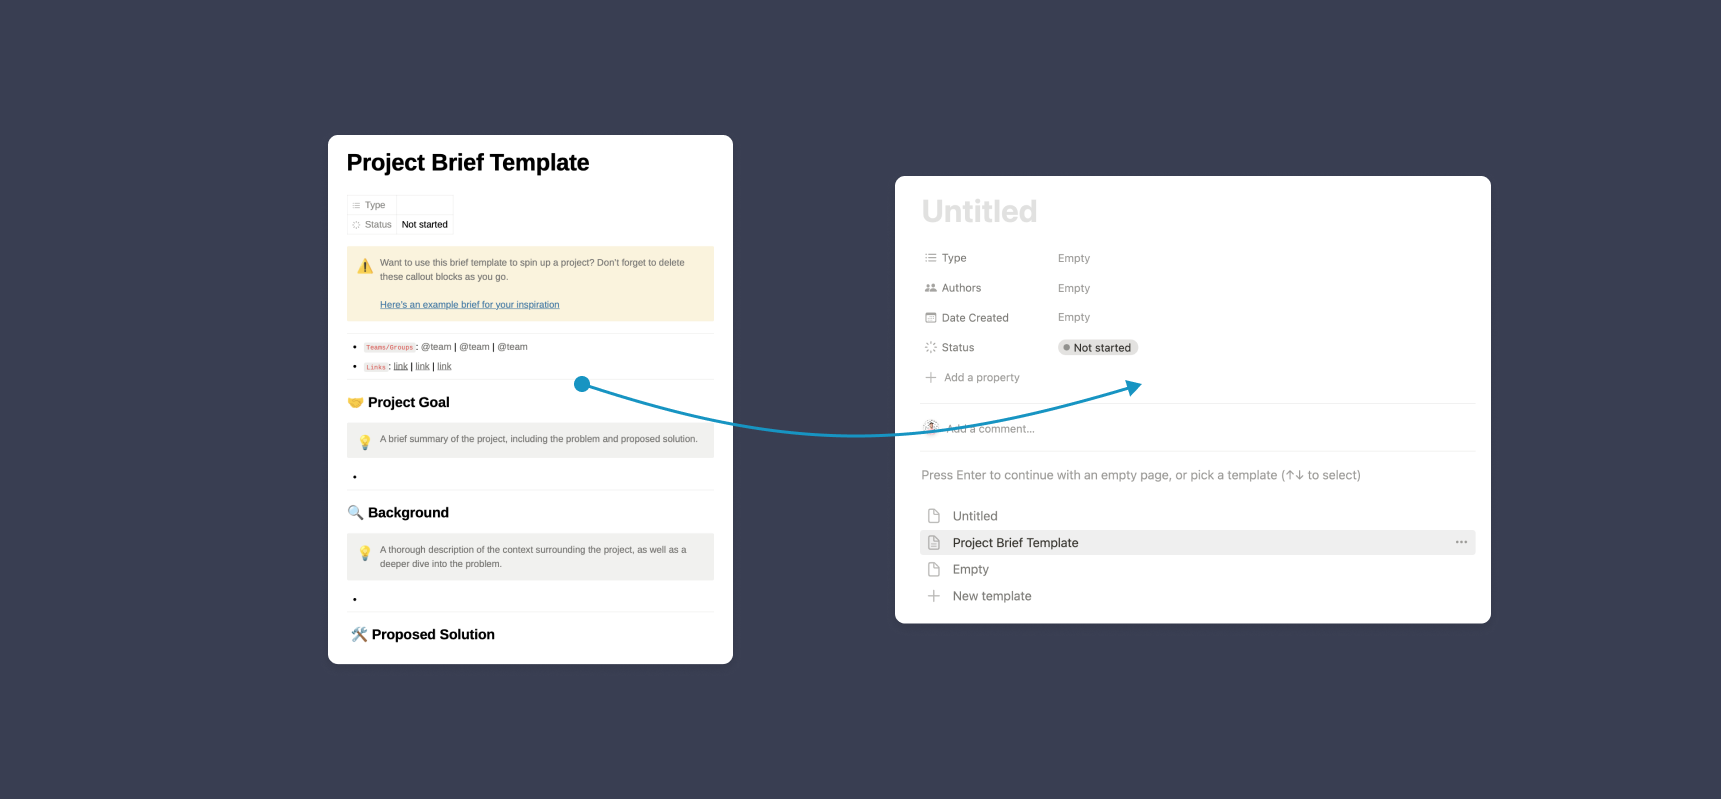 A project brief template in Notion